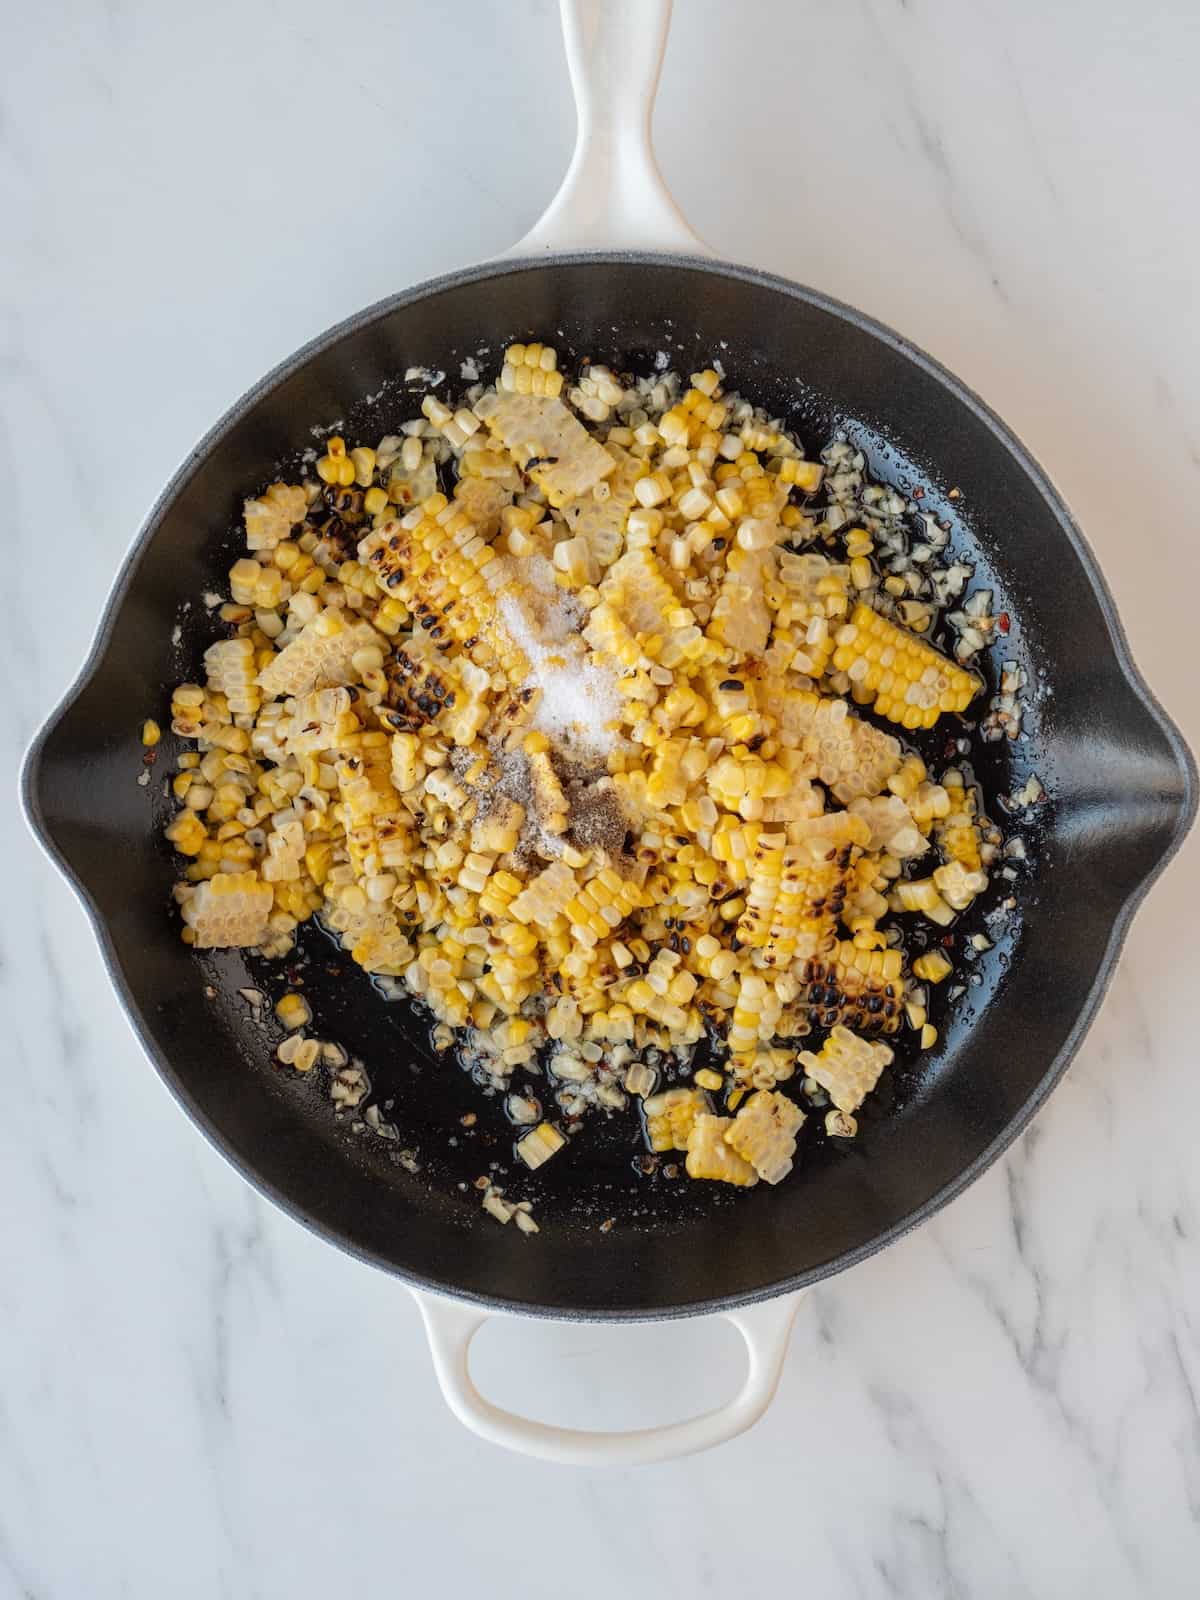 A skillet with the grilled corn kernels removed from the cob.